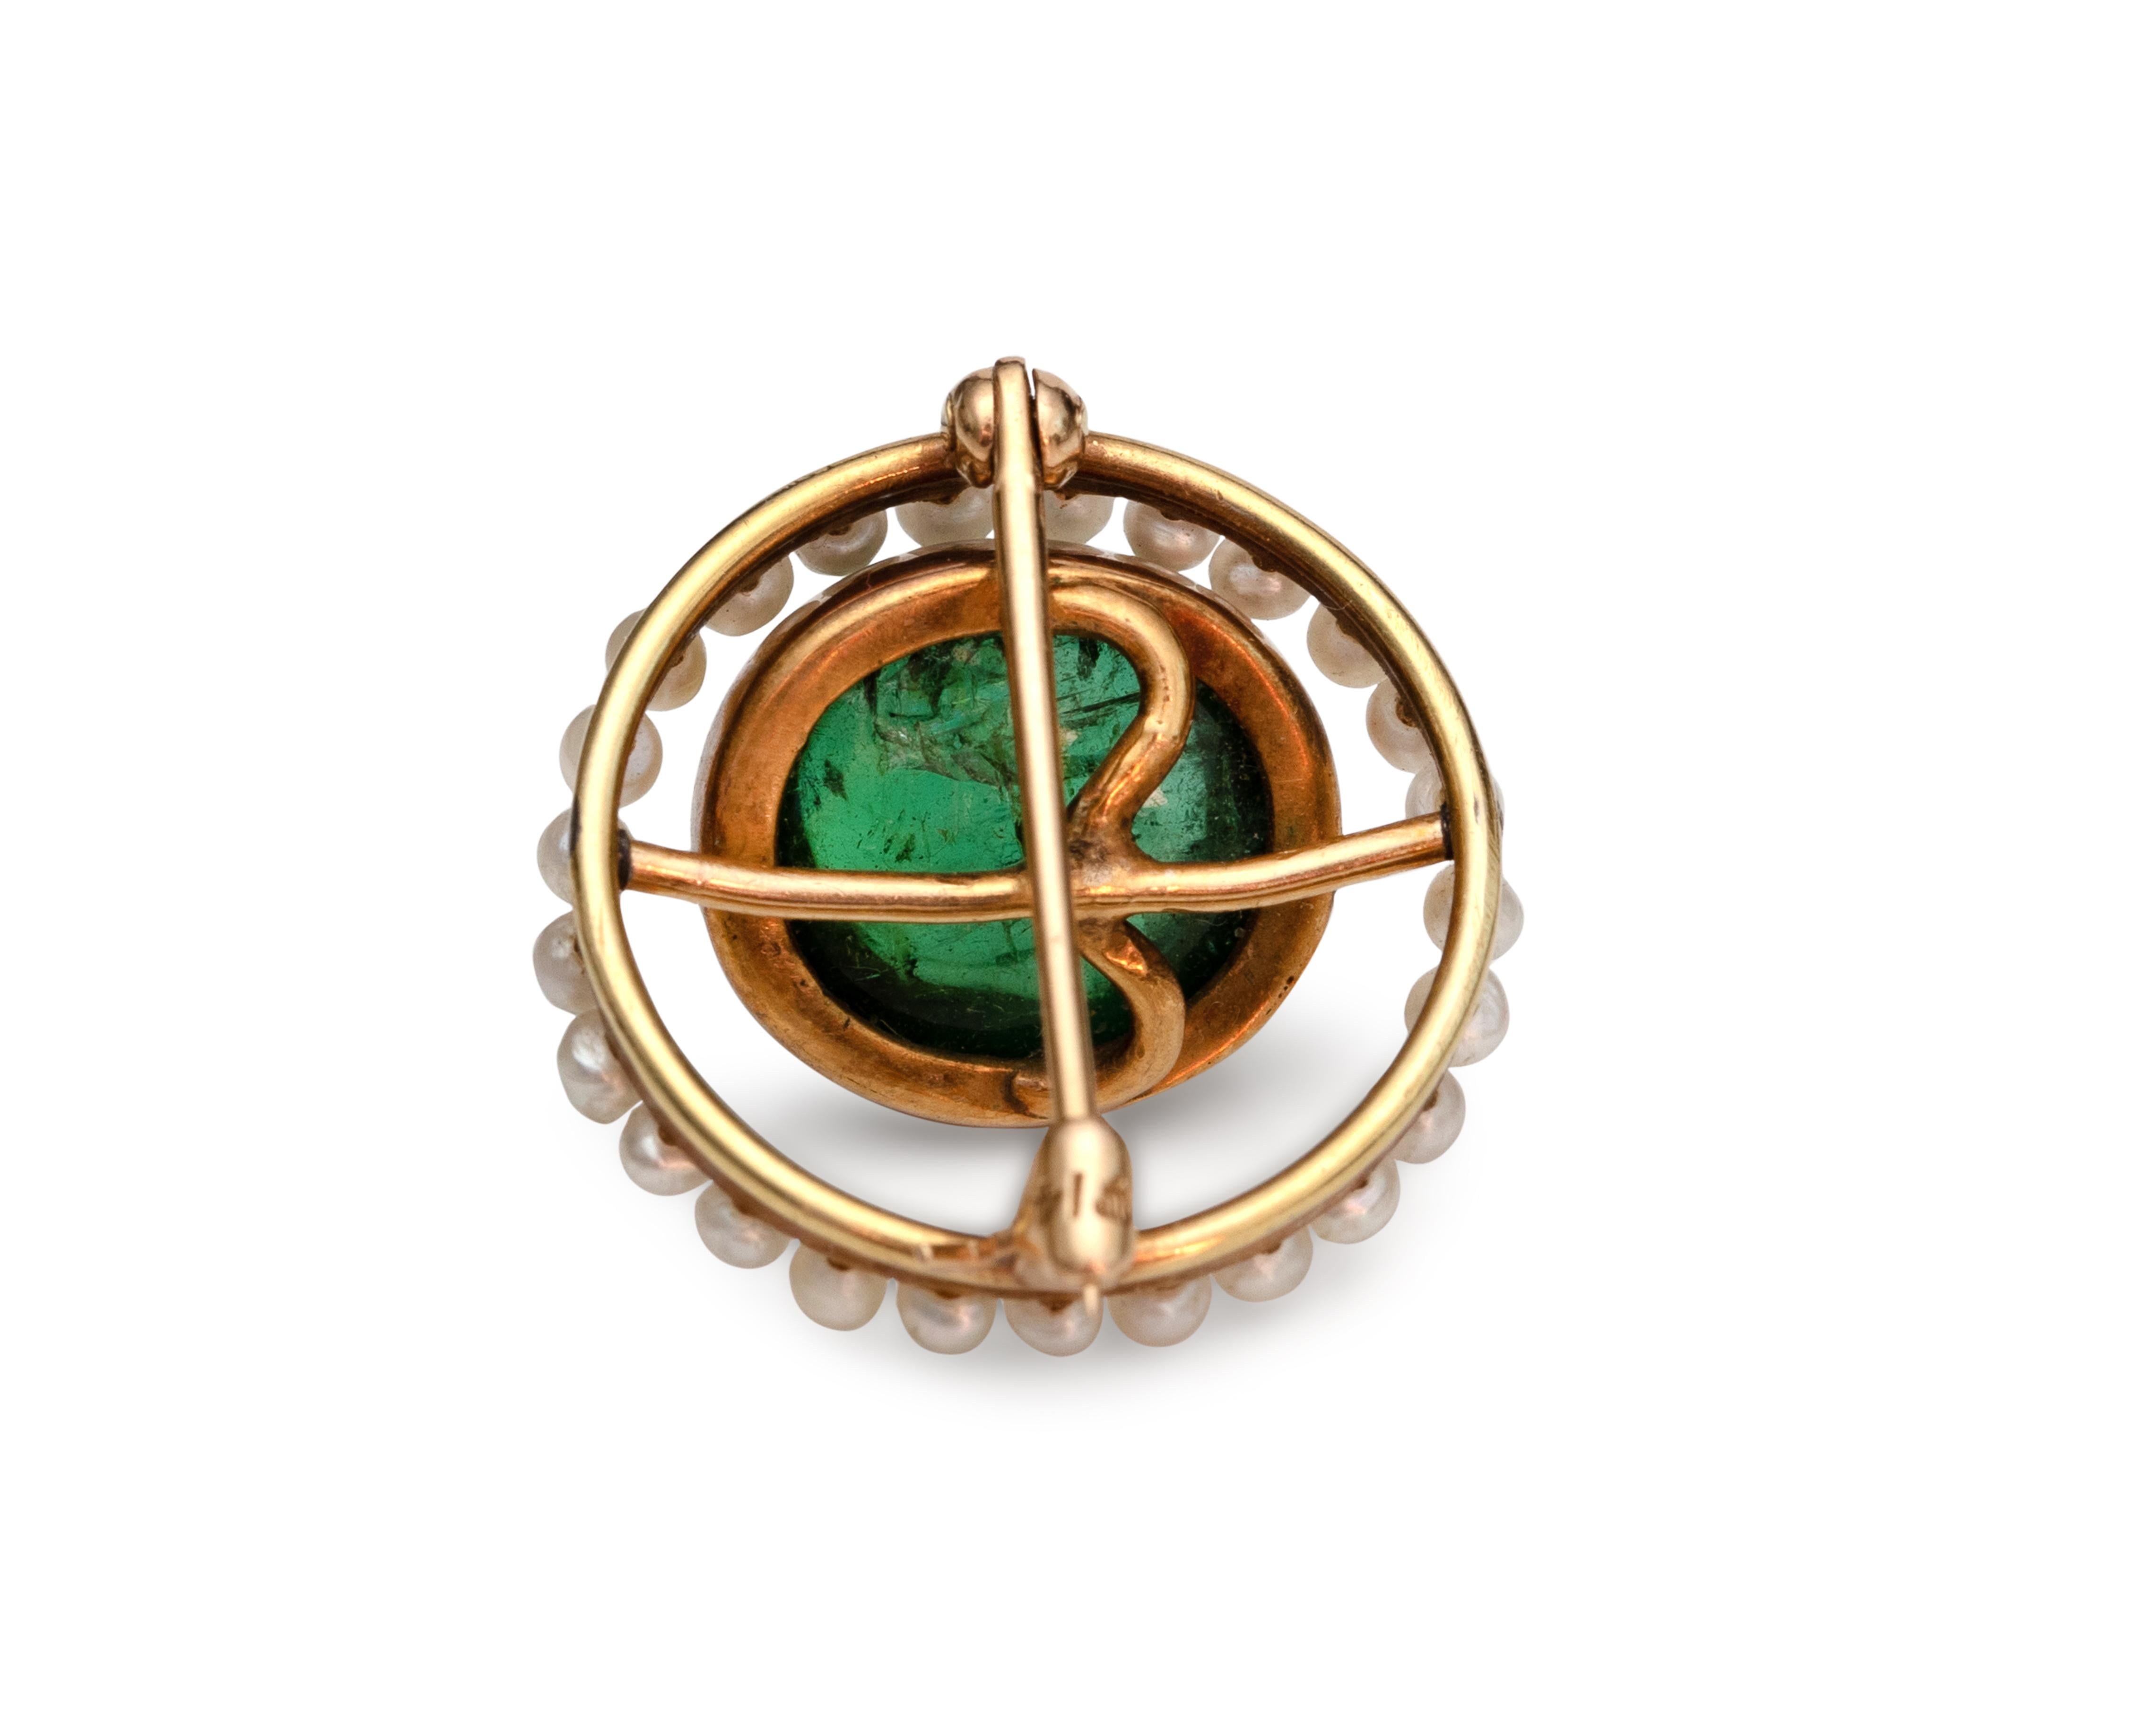 Item Details:
Metal type: 14 Karat Yellow Gold
Weight: 4.6 grams
Measures: .75 Inches

Gemstone Details - Tourmaline in the Center
Color: Rich green 
Carat: 4 Carats
Cut: Round
The tourmaline is bezel set in a beautiful 14 karat gold basket

The